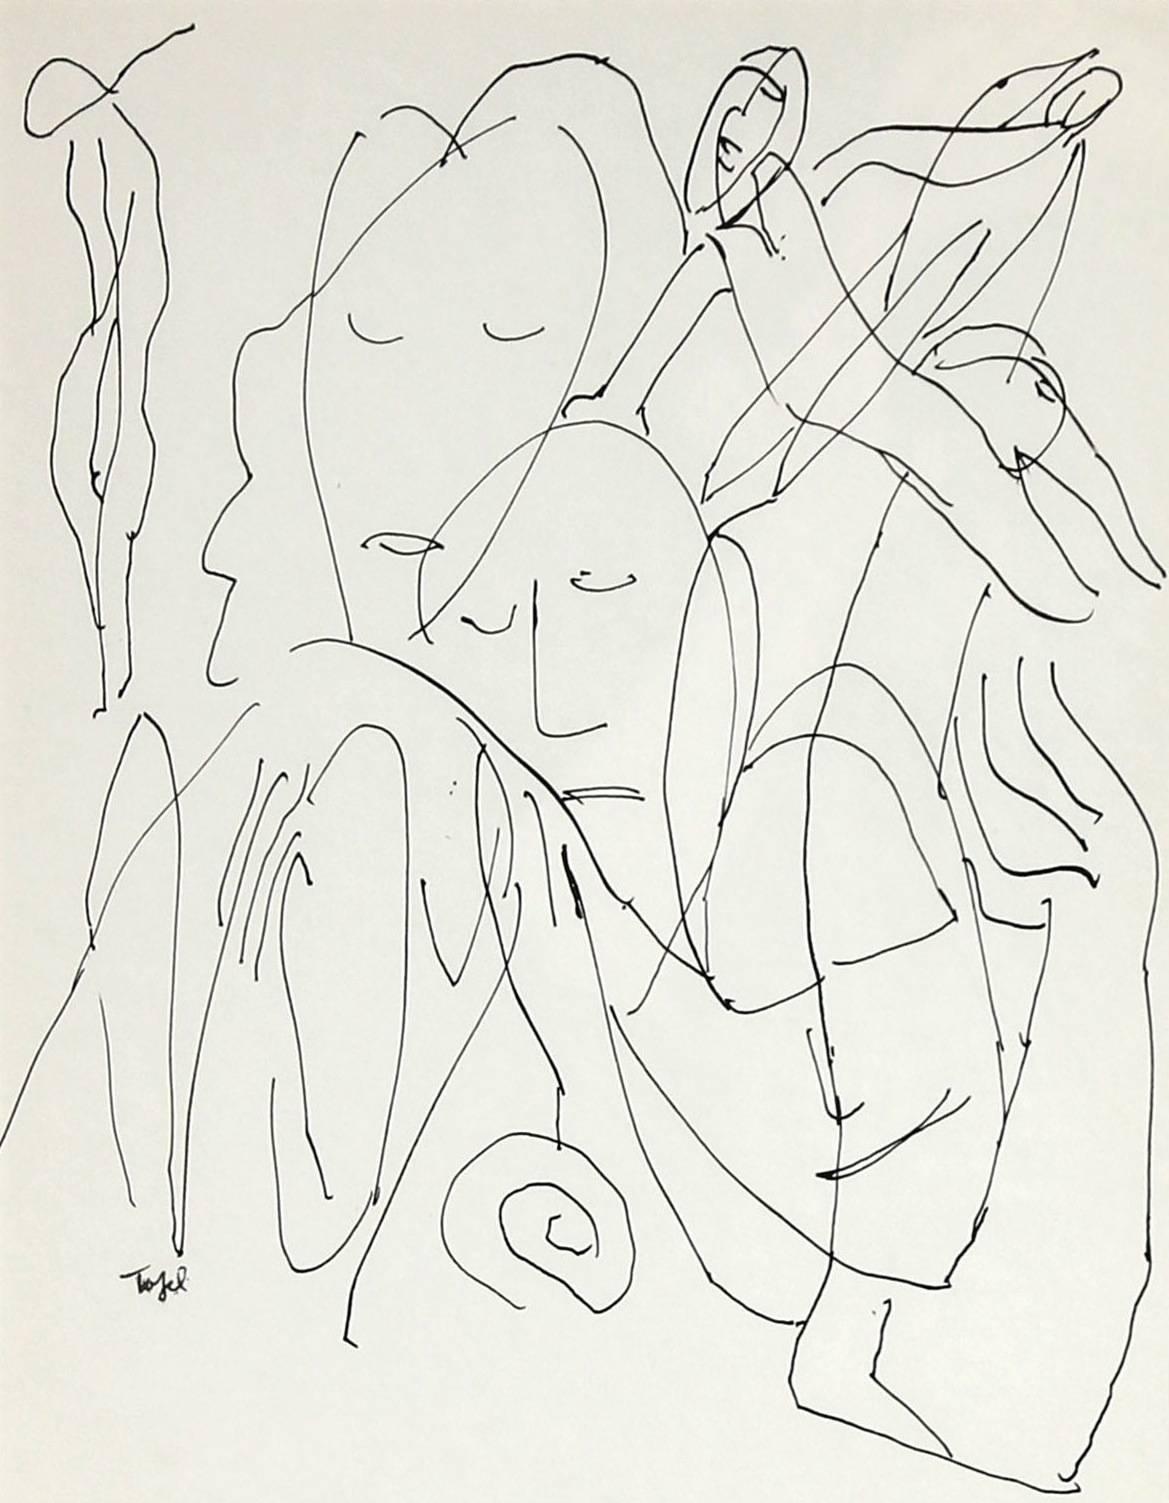 This early 20th century ink on paper drawing of a couple hugging is by Polish-born New York Expressionist Jennings Tofel (1891-1959). Tofel was a friend of Georgia O'Keefe and Alfred Stieglitz. He received an art grant to work in Paris in the 1920s.